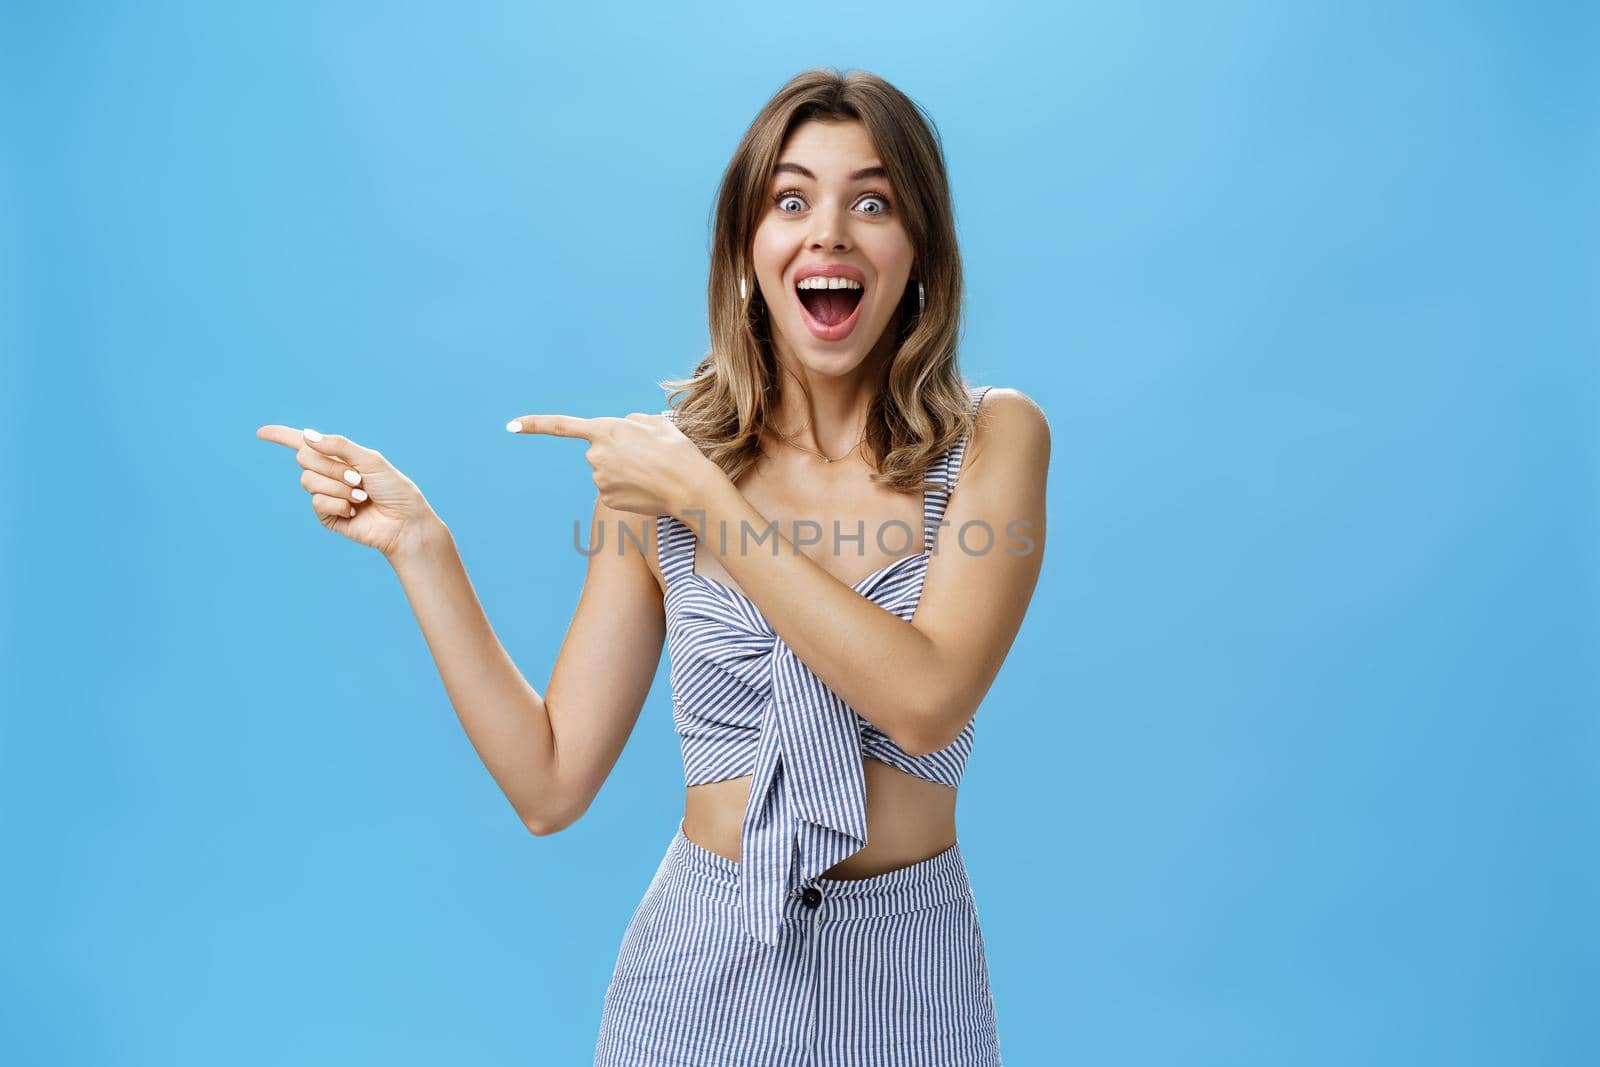 Unaltered shot of excited amused adult attractive woman with gapped teeth pointing left and smiling broadly from happiness and joy standing delighted and thrilled over blue background. Copy space